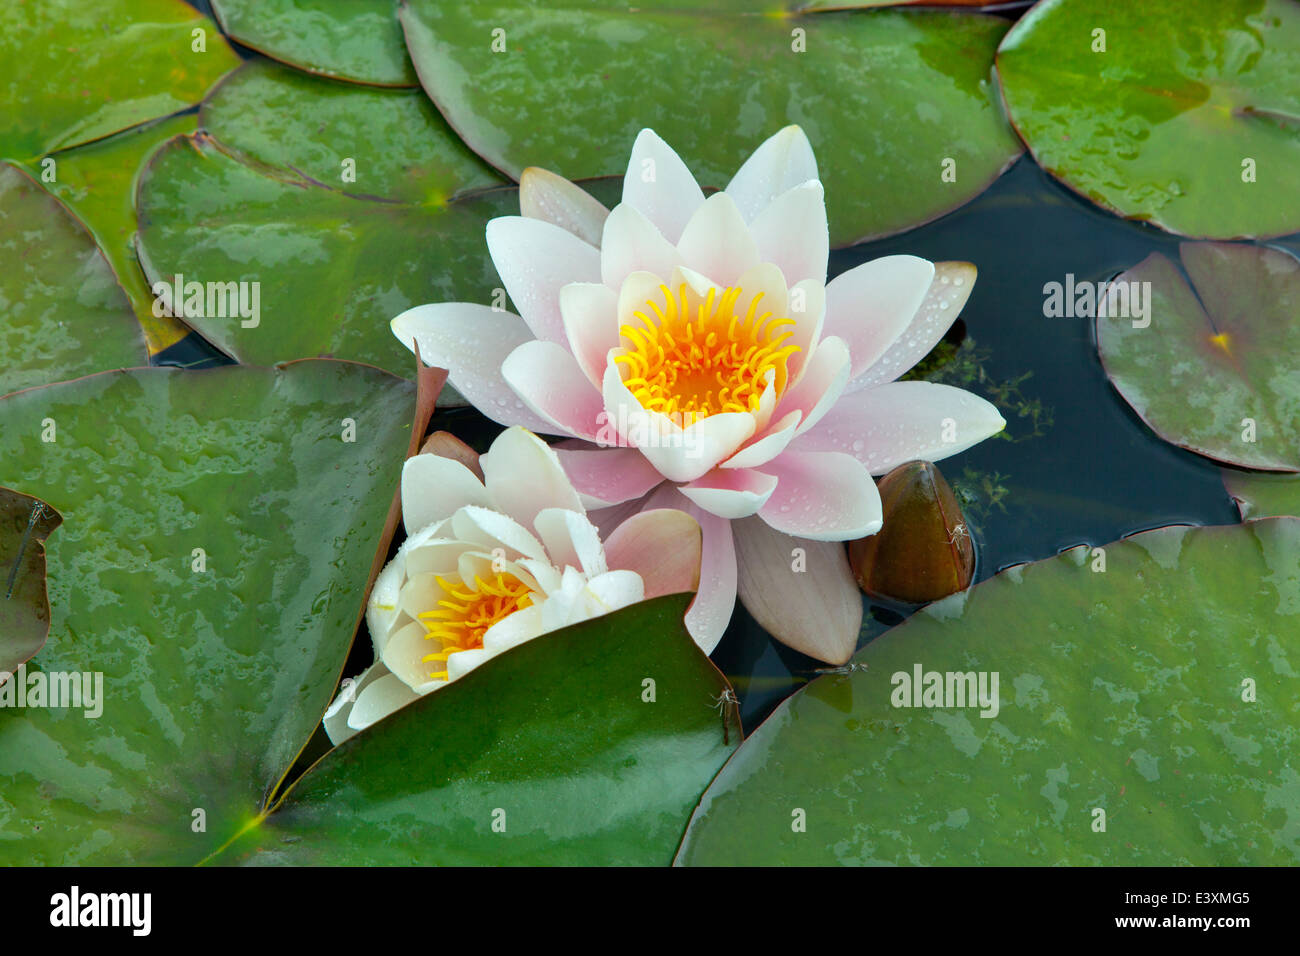 White water-lily and leaves in garden pond Stock Photo